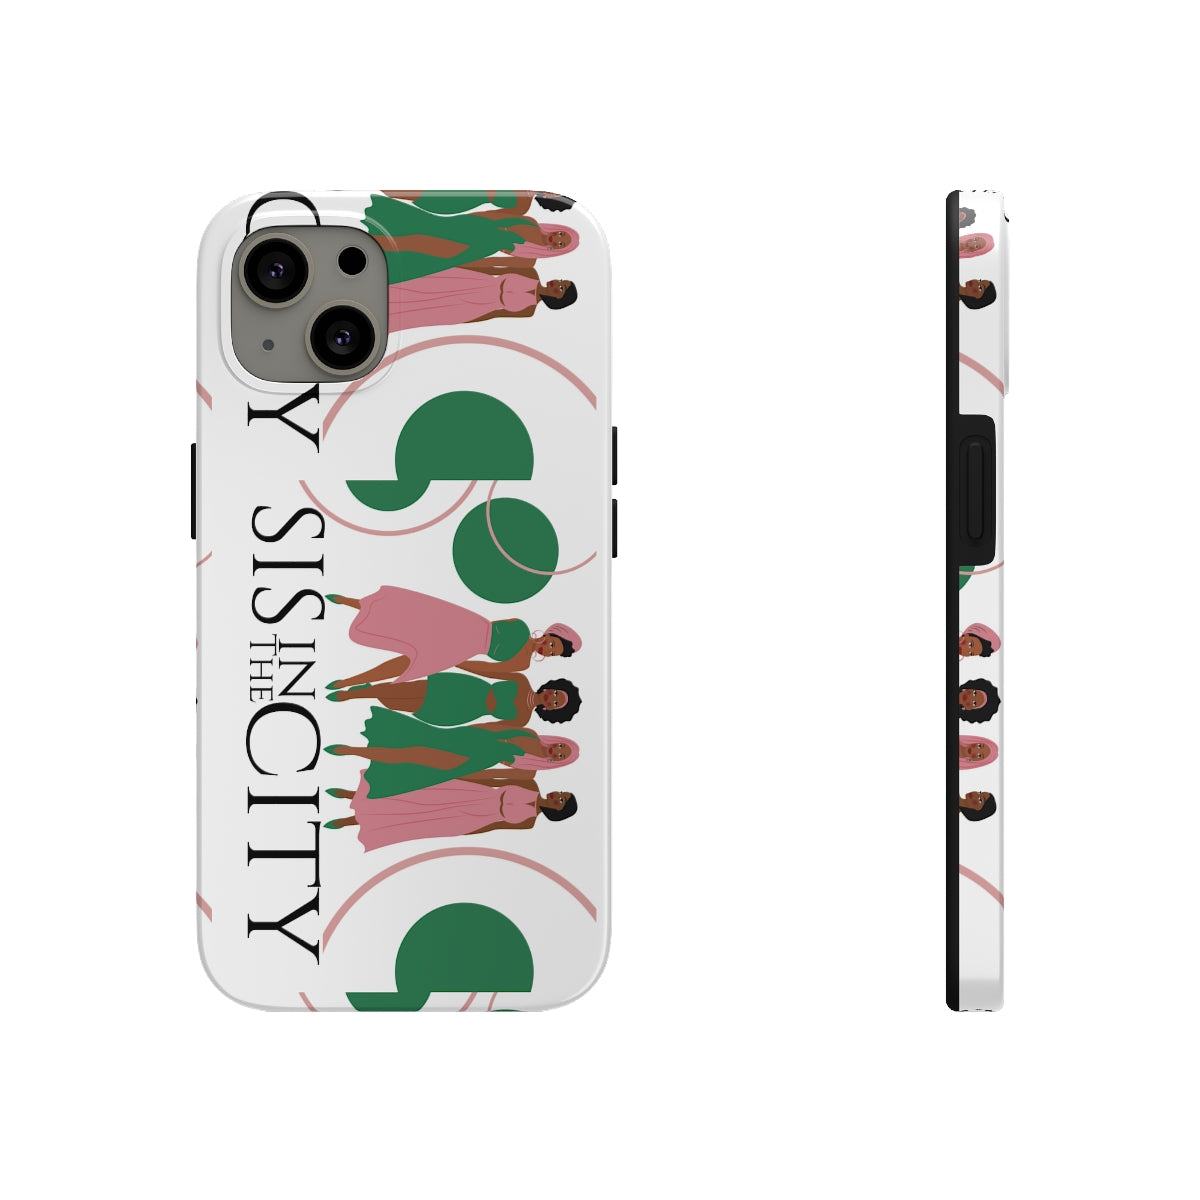 "Sis In The City" AKA IPhone Cases, Case-Mate